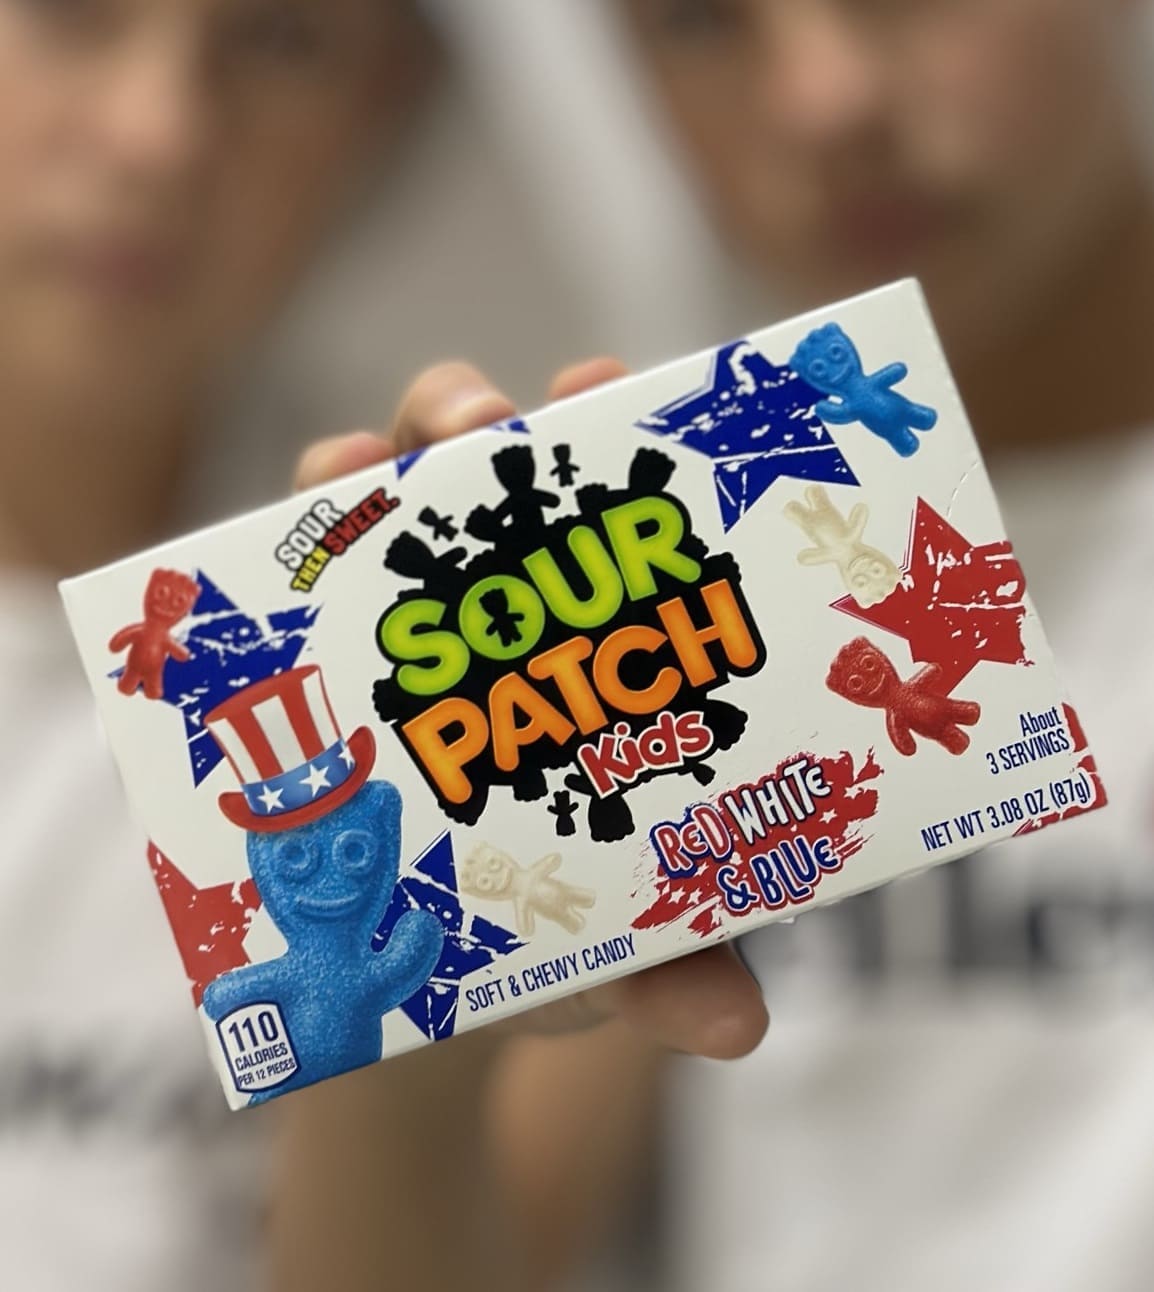 sour-patch-red-white-and-blue-87g